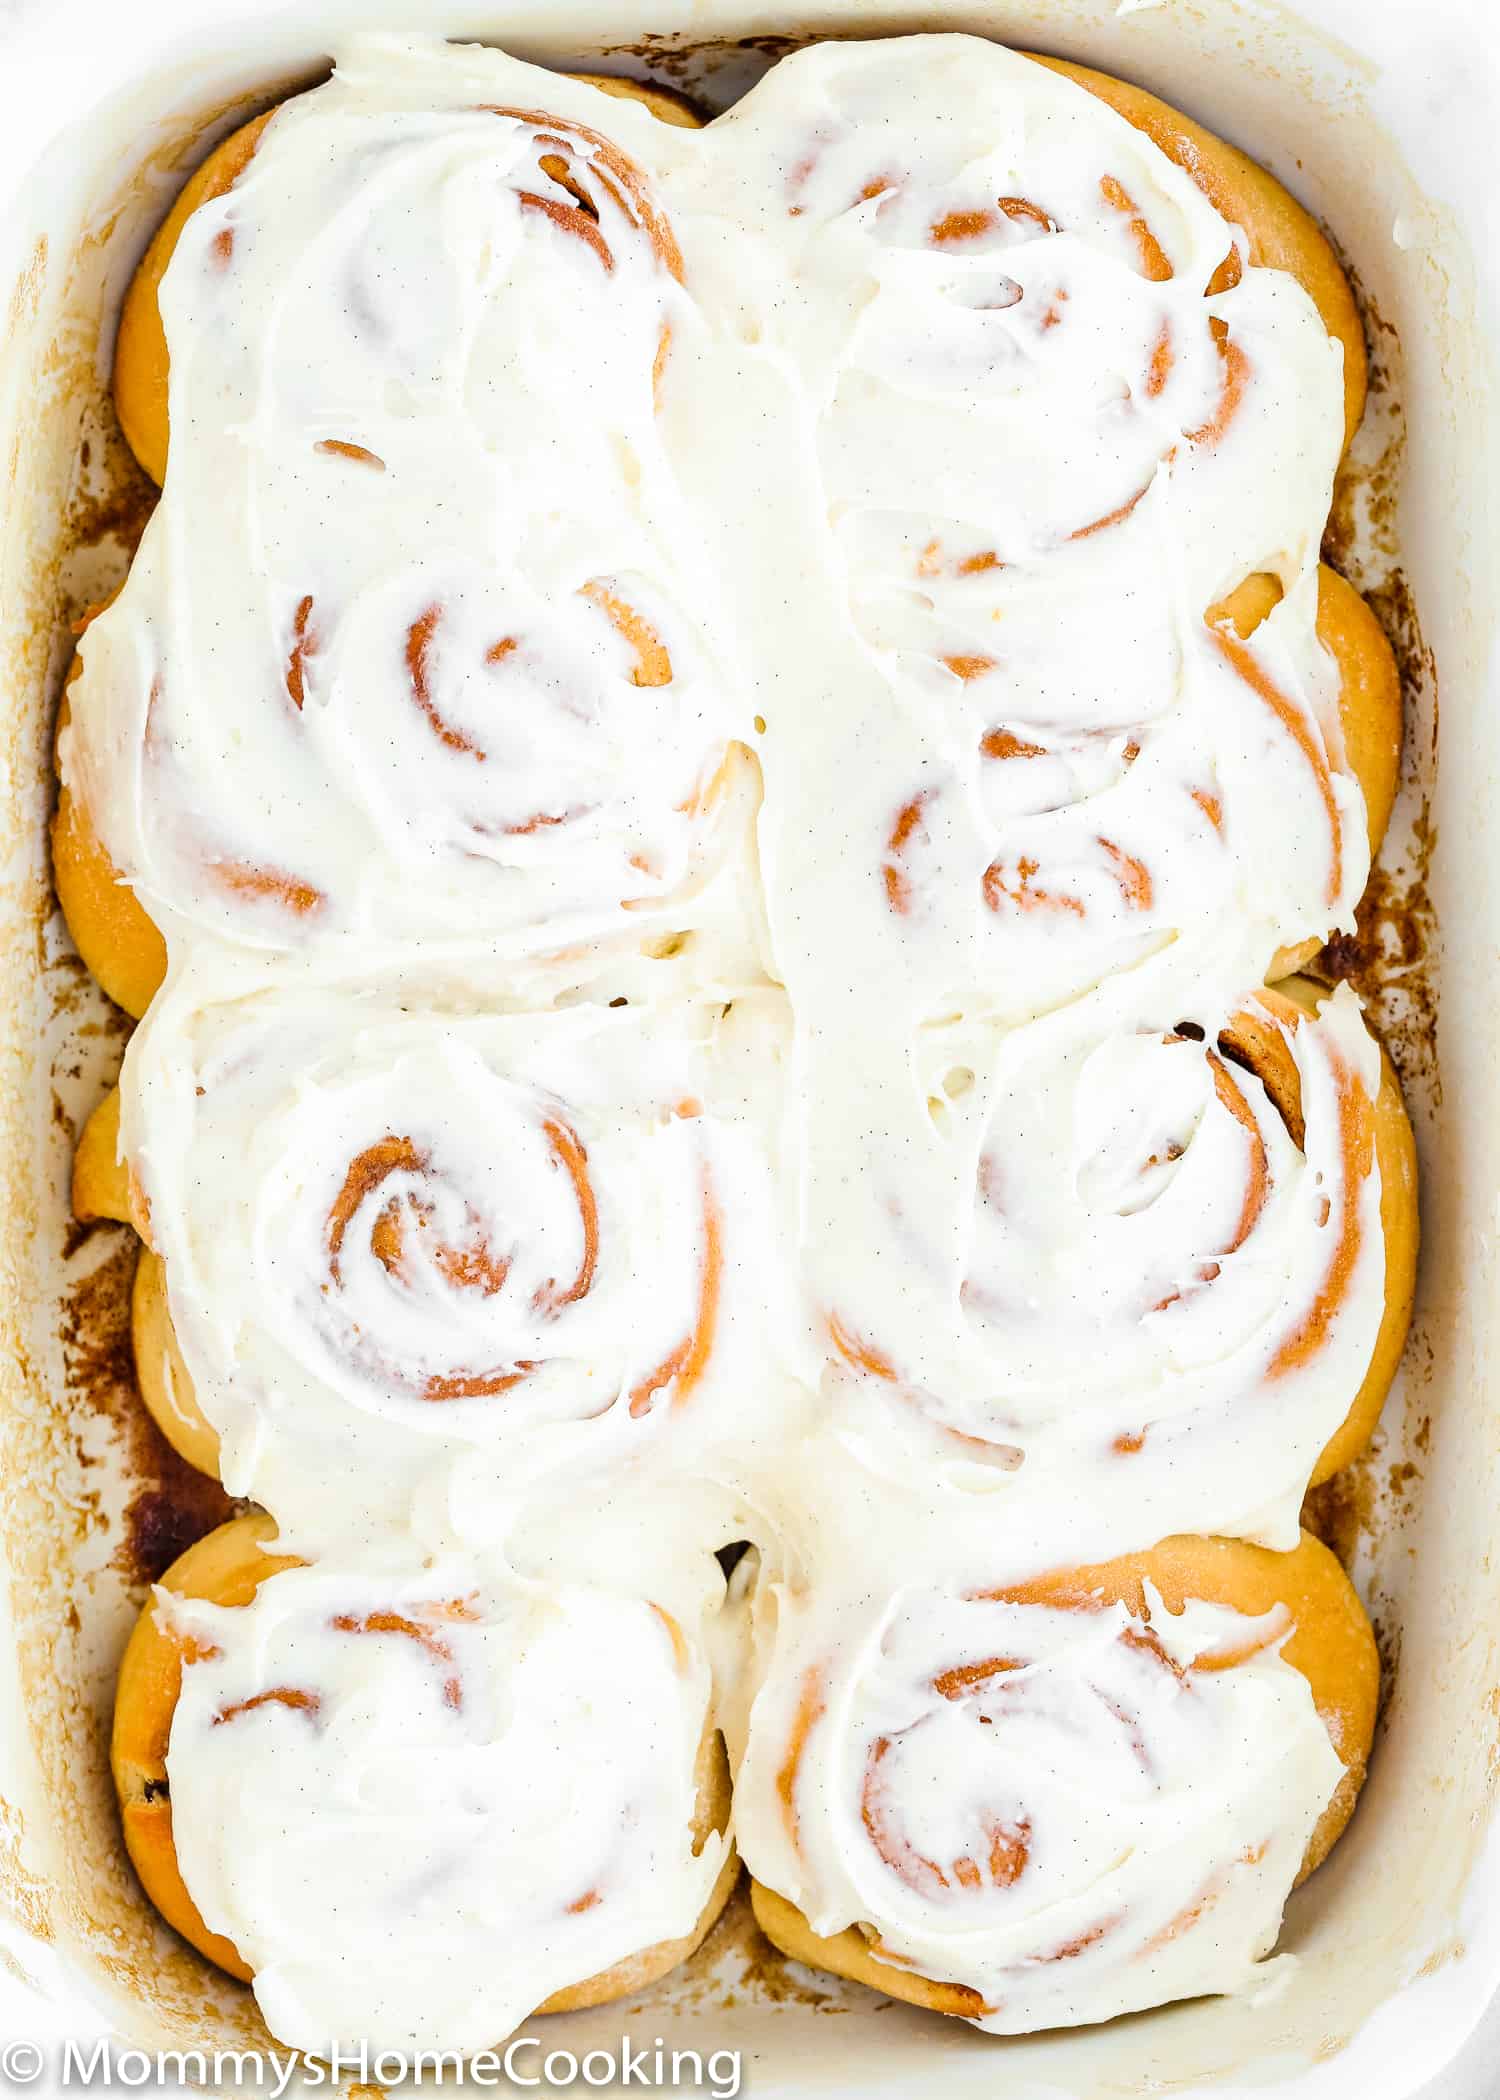 Baked egg-free cinnamon rolls in a baking pan with frosting on top.